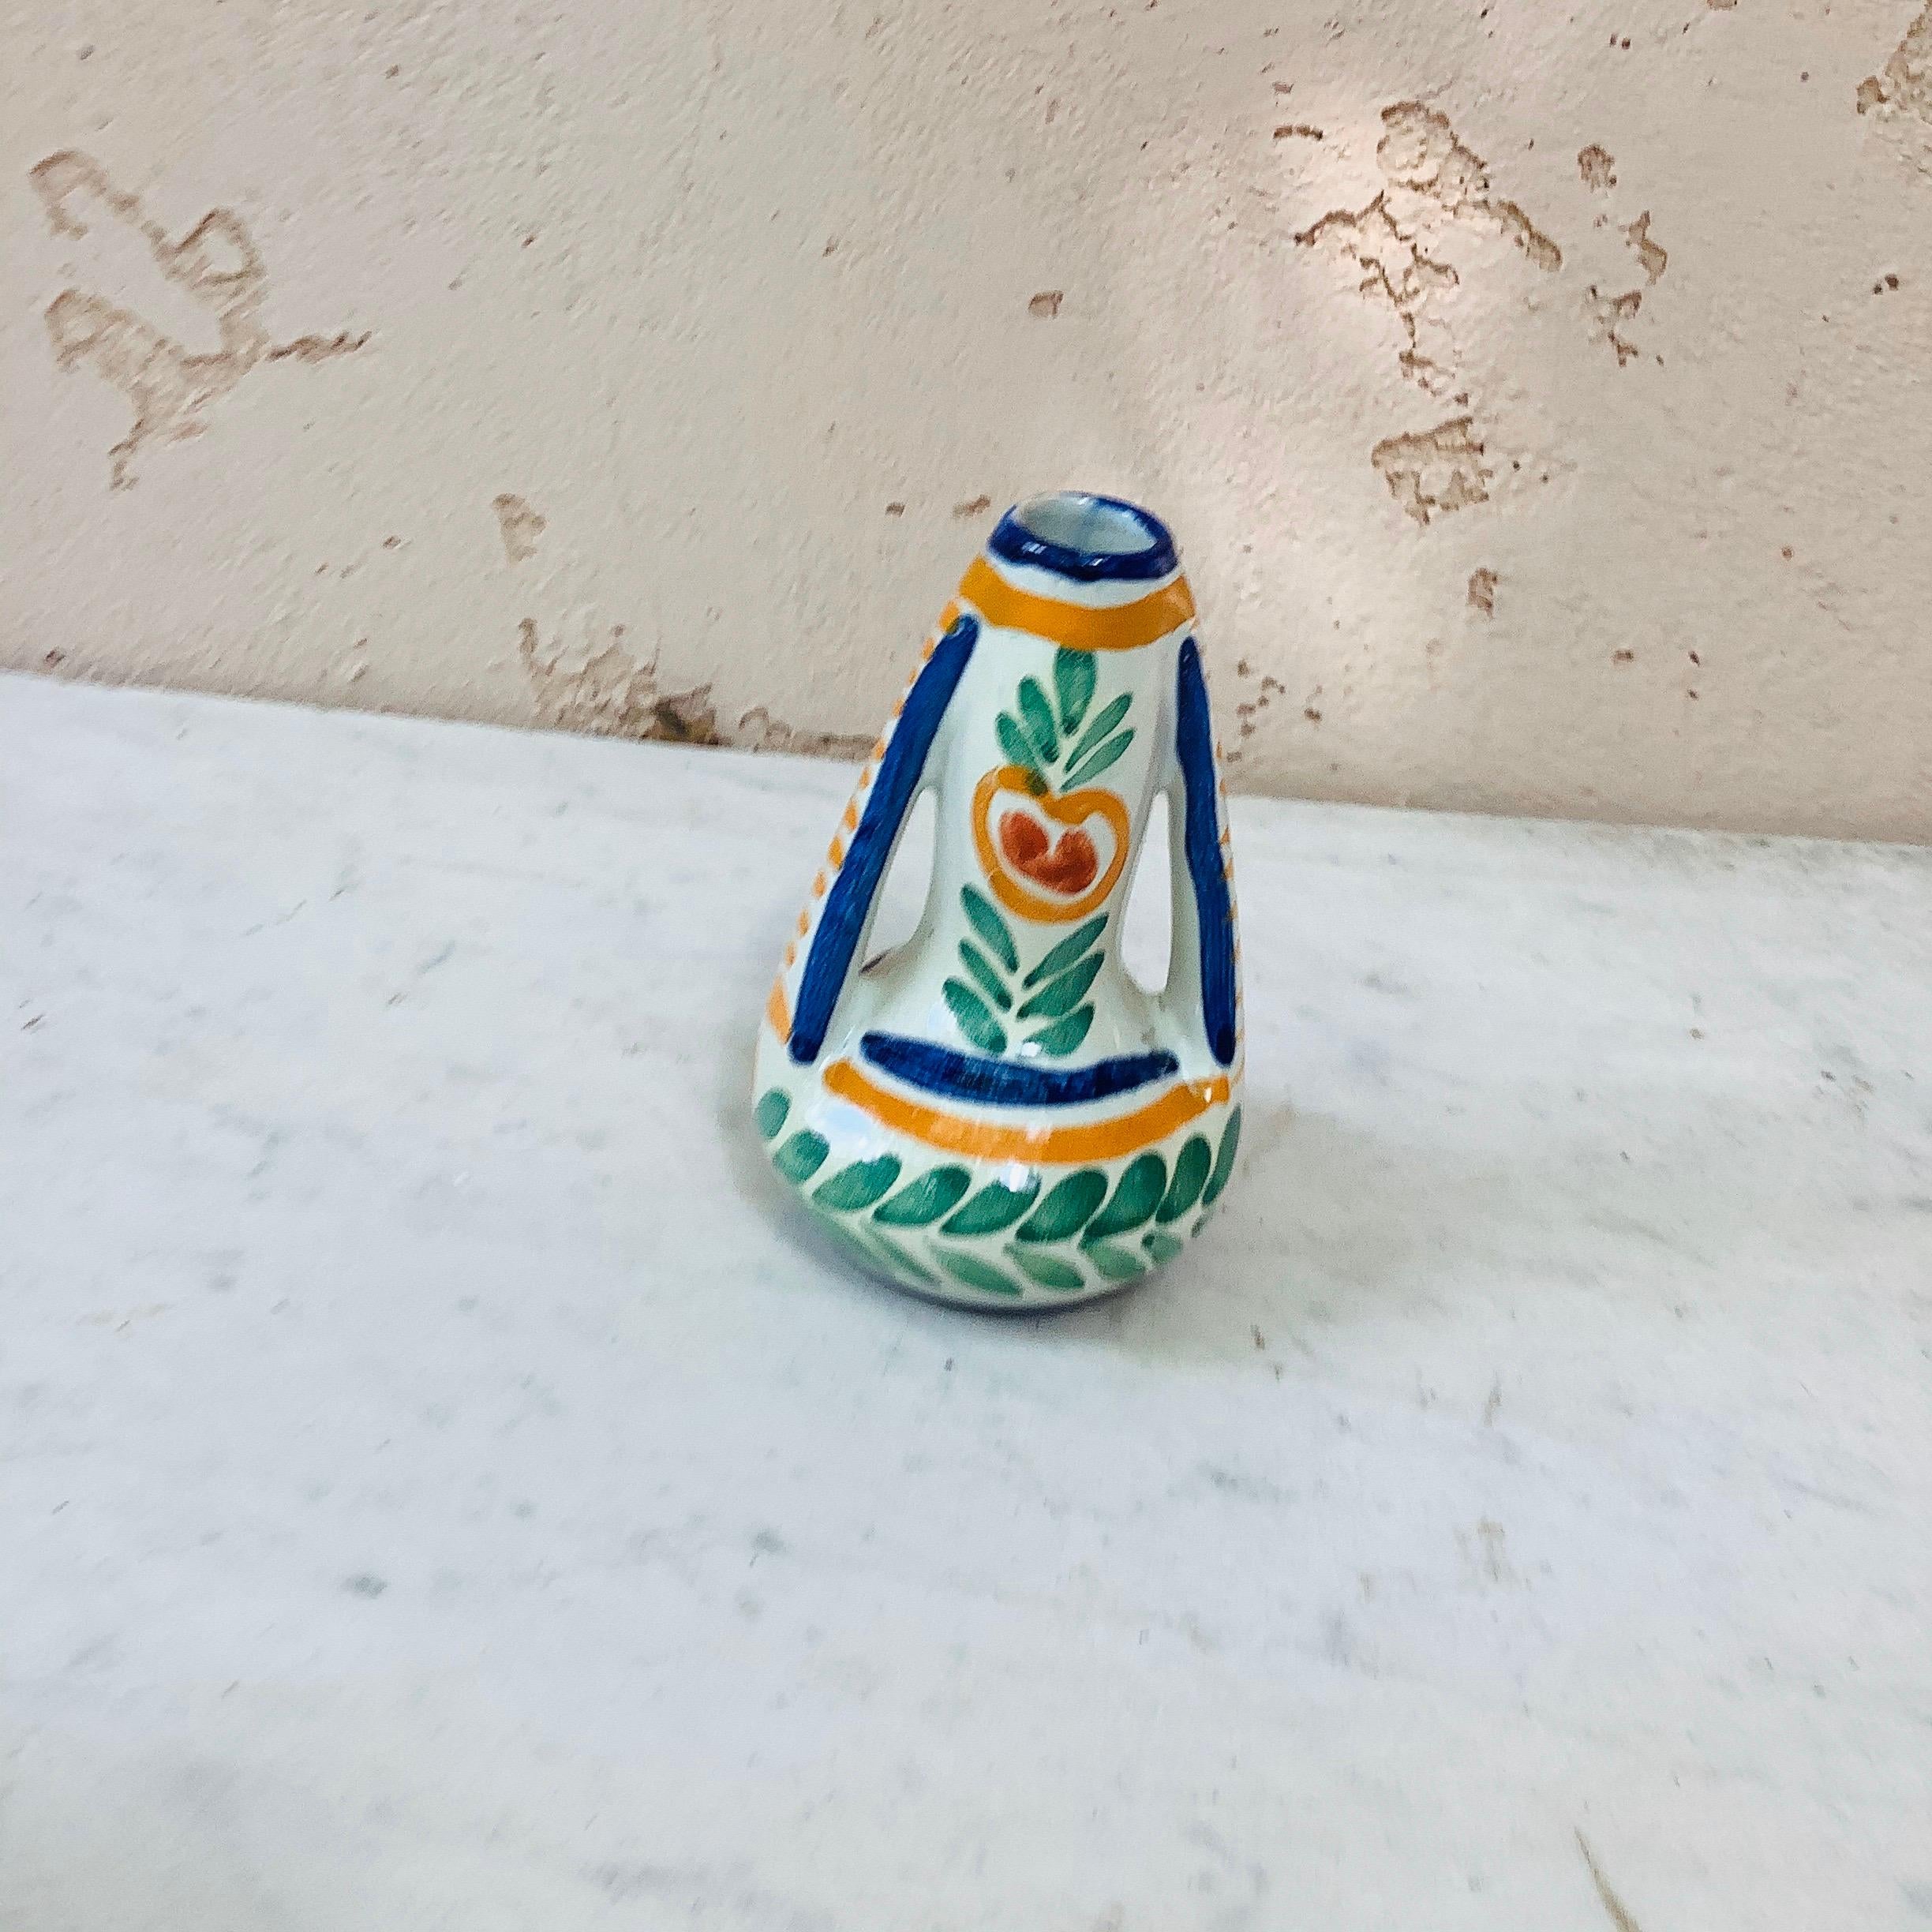 French faience vase with handles decorated with a Breton figure signed 